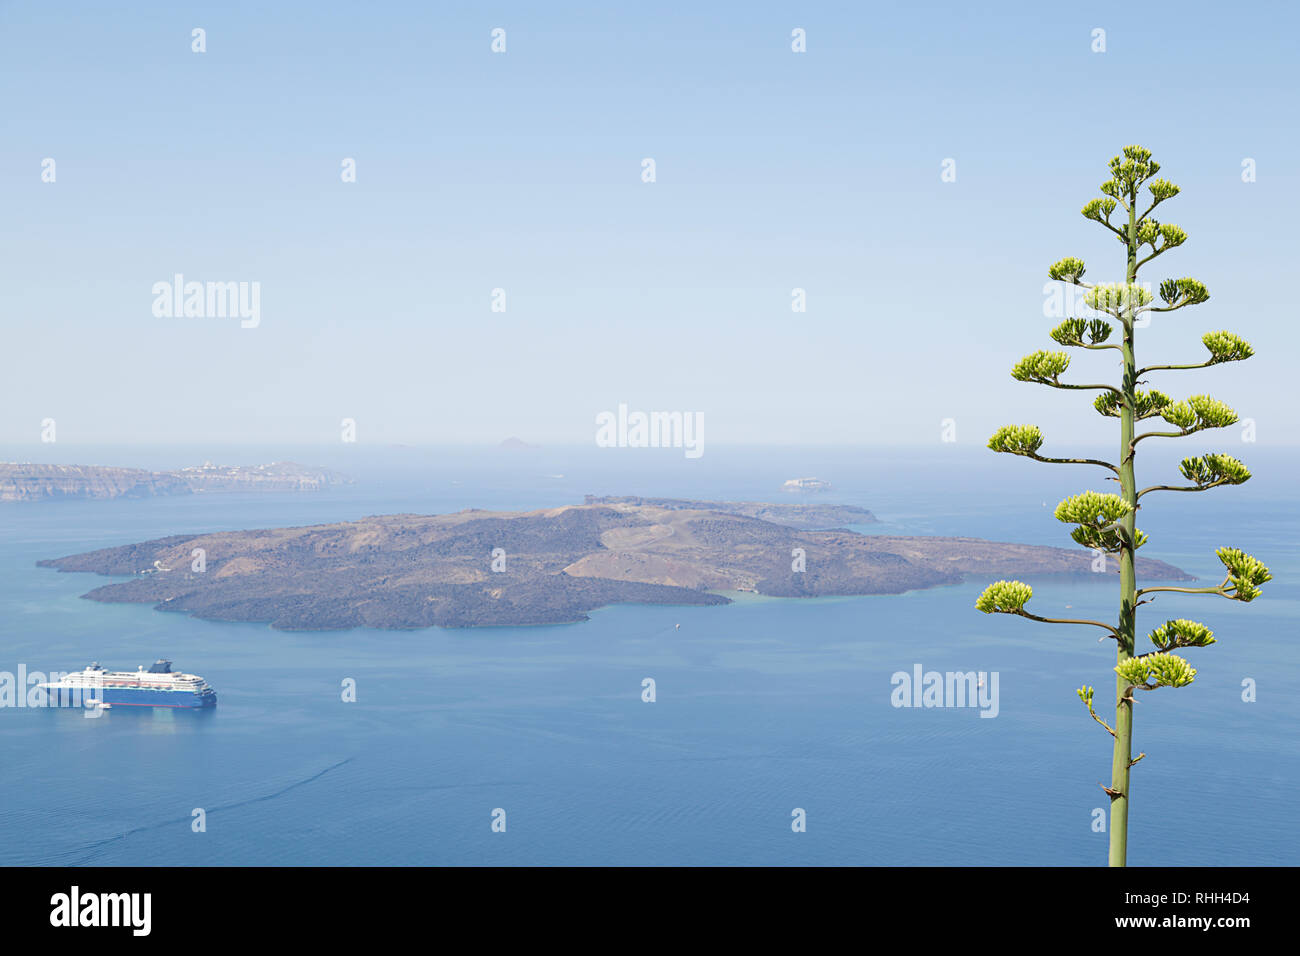 Landscape with aegean sea view. Cruise liner at the sea near the islands.Agave plant flower at the foreground. Santorini island, Greece Stock Photo